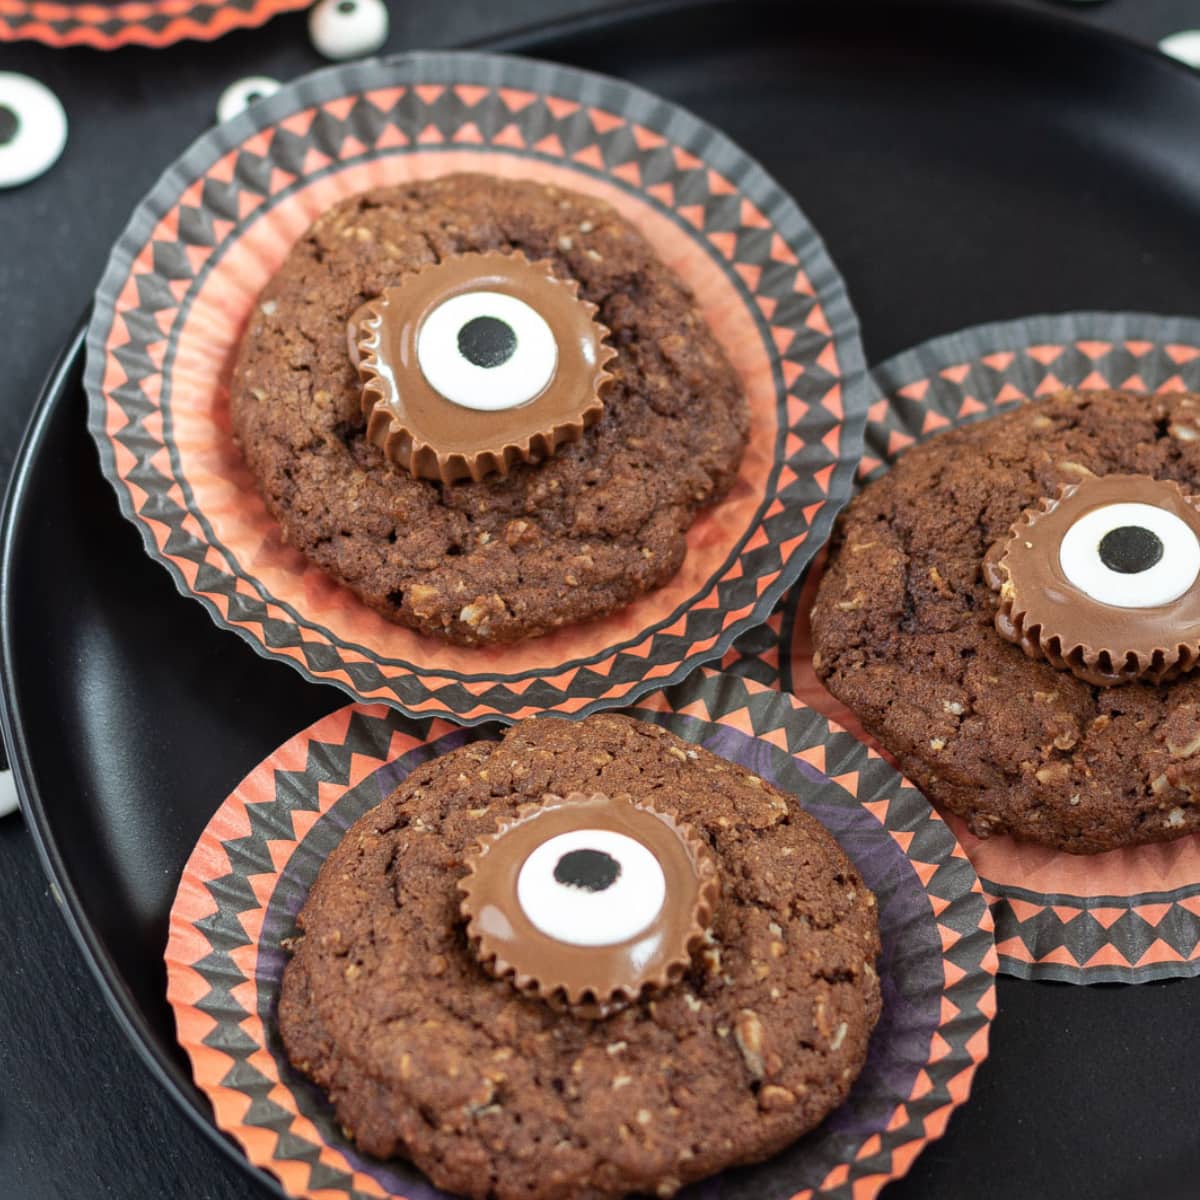 Round cupcake papers with chocolate cookies decorated with candy eyes